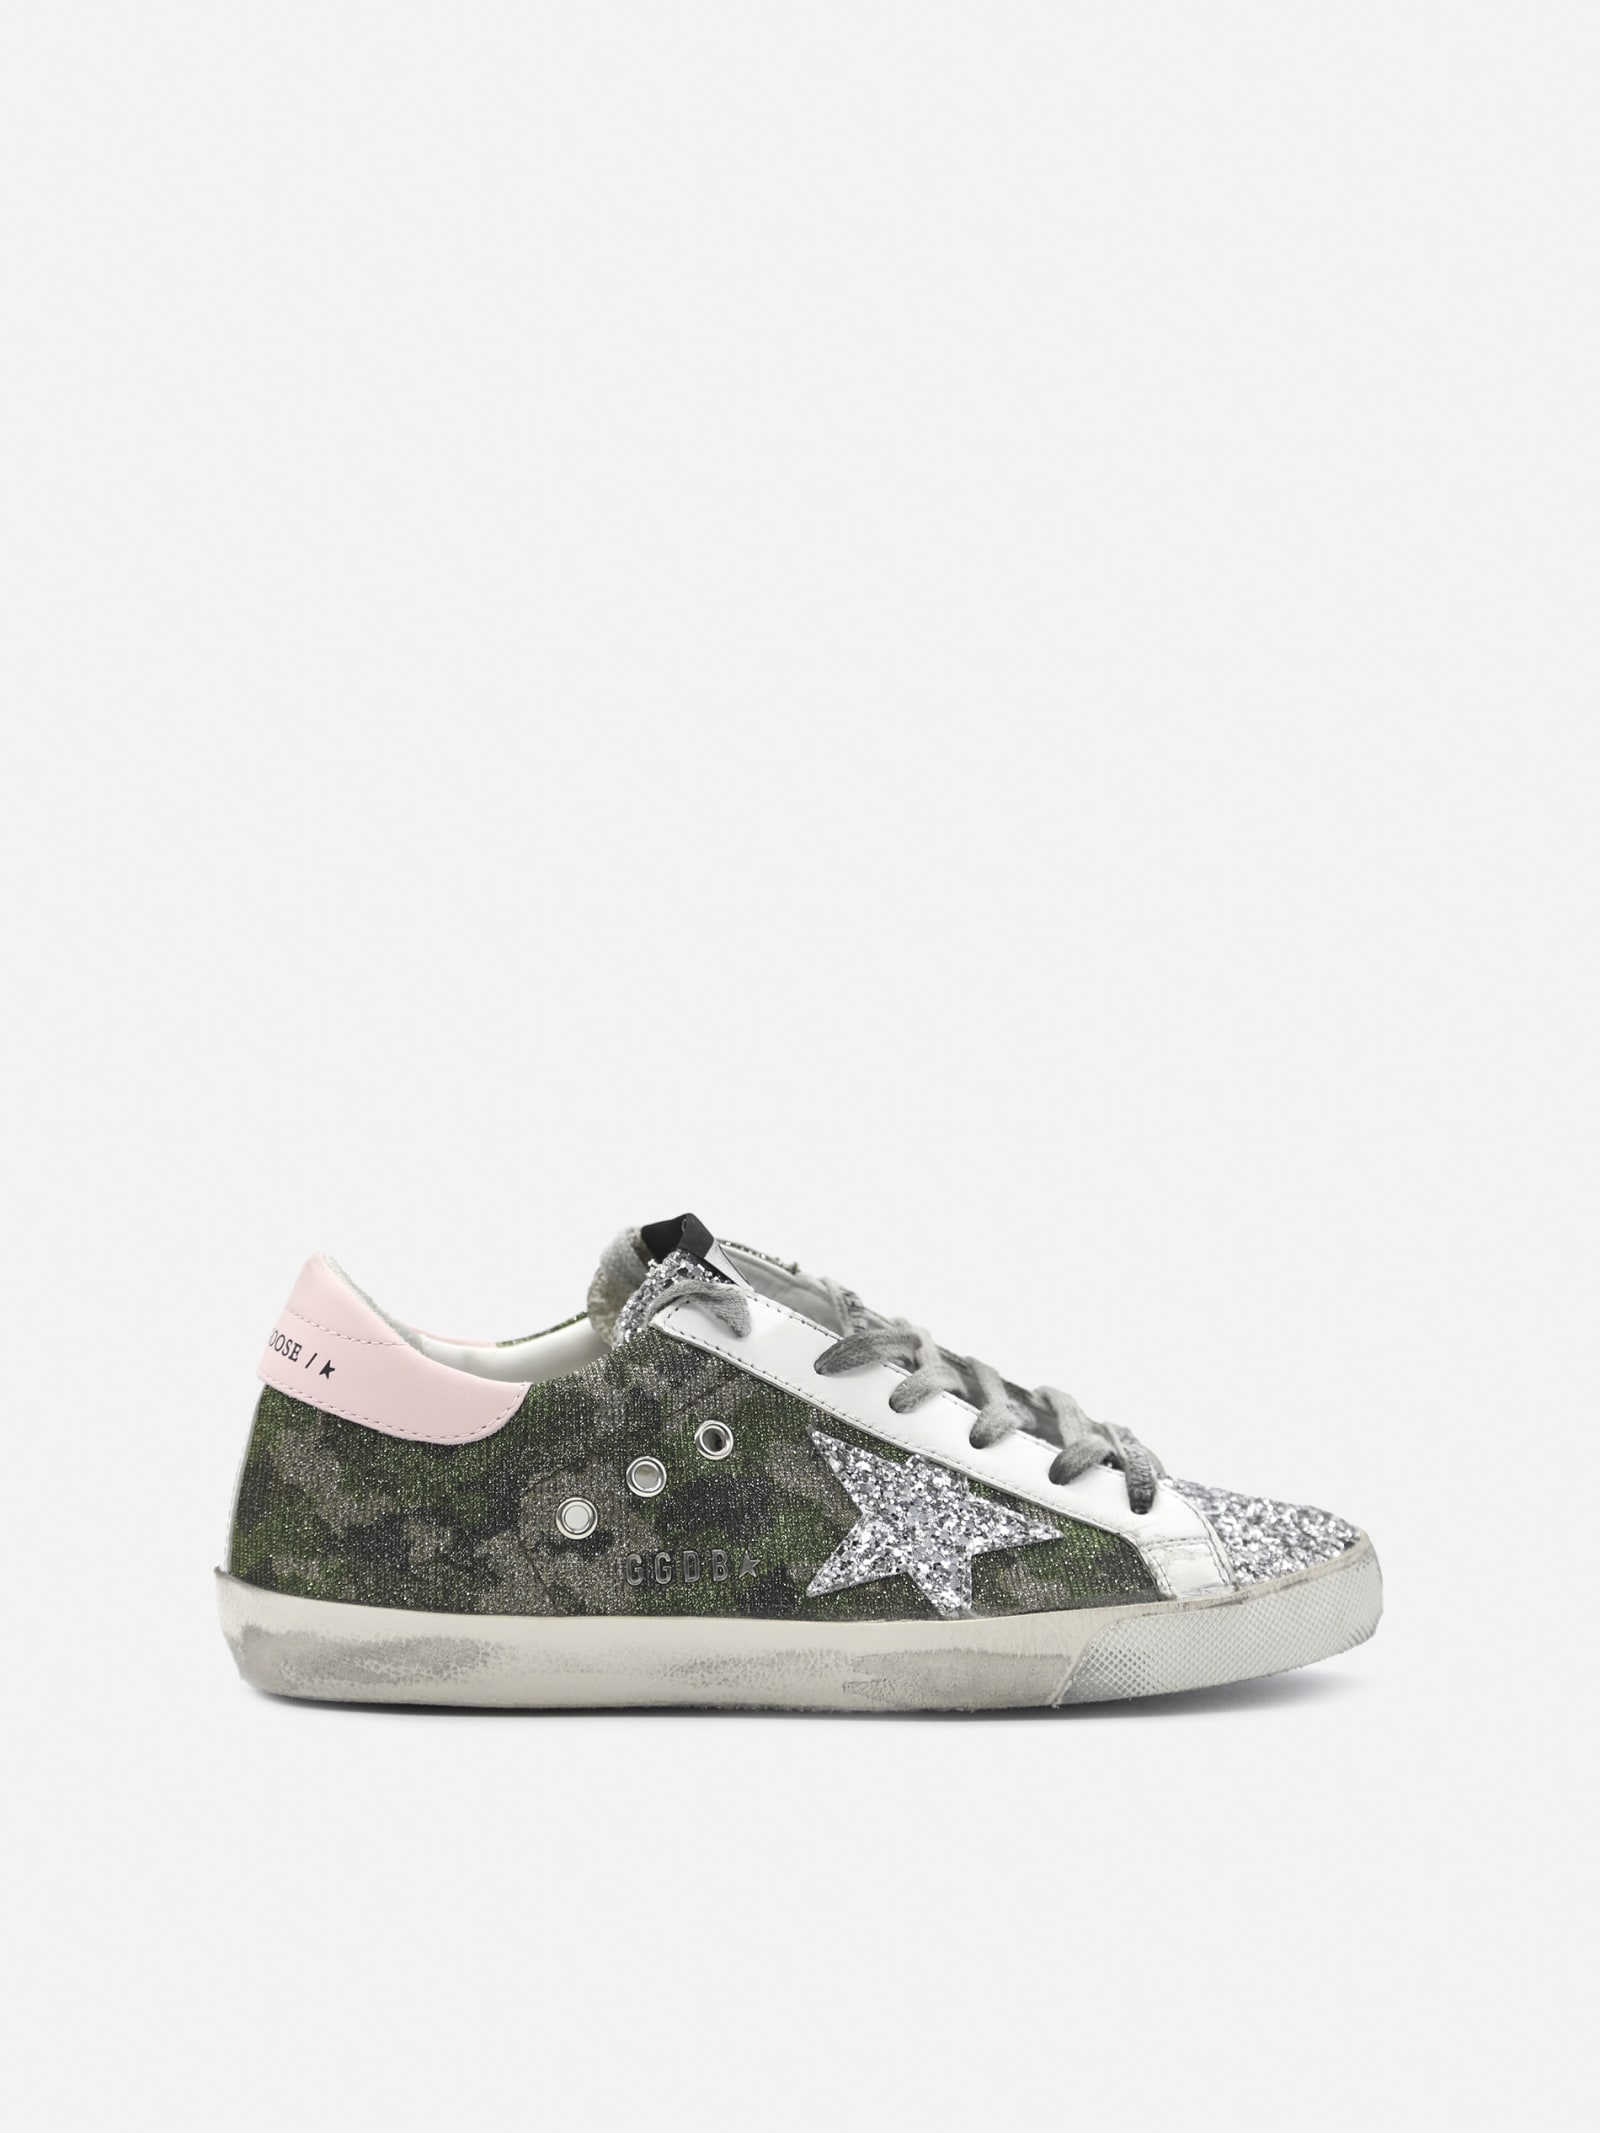 Buy Golden Goose Superstar Sneakers With Camouflage And Glitter Pattern online, shop Golden Goose shoes with free shipping